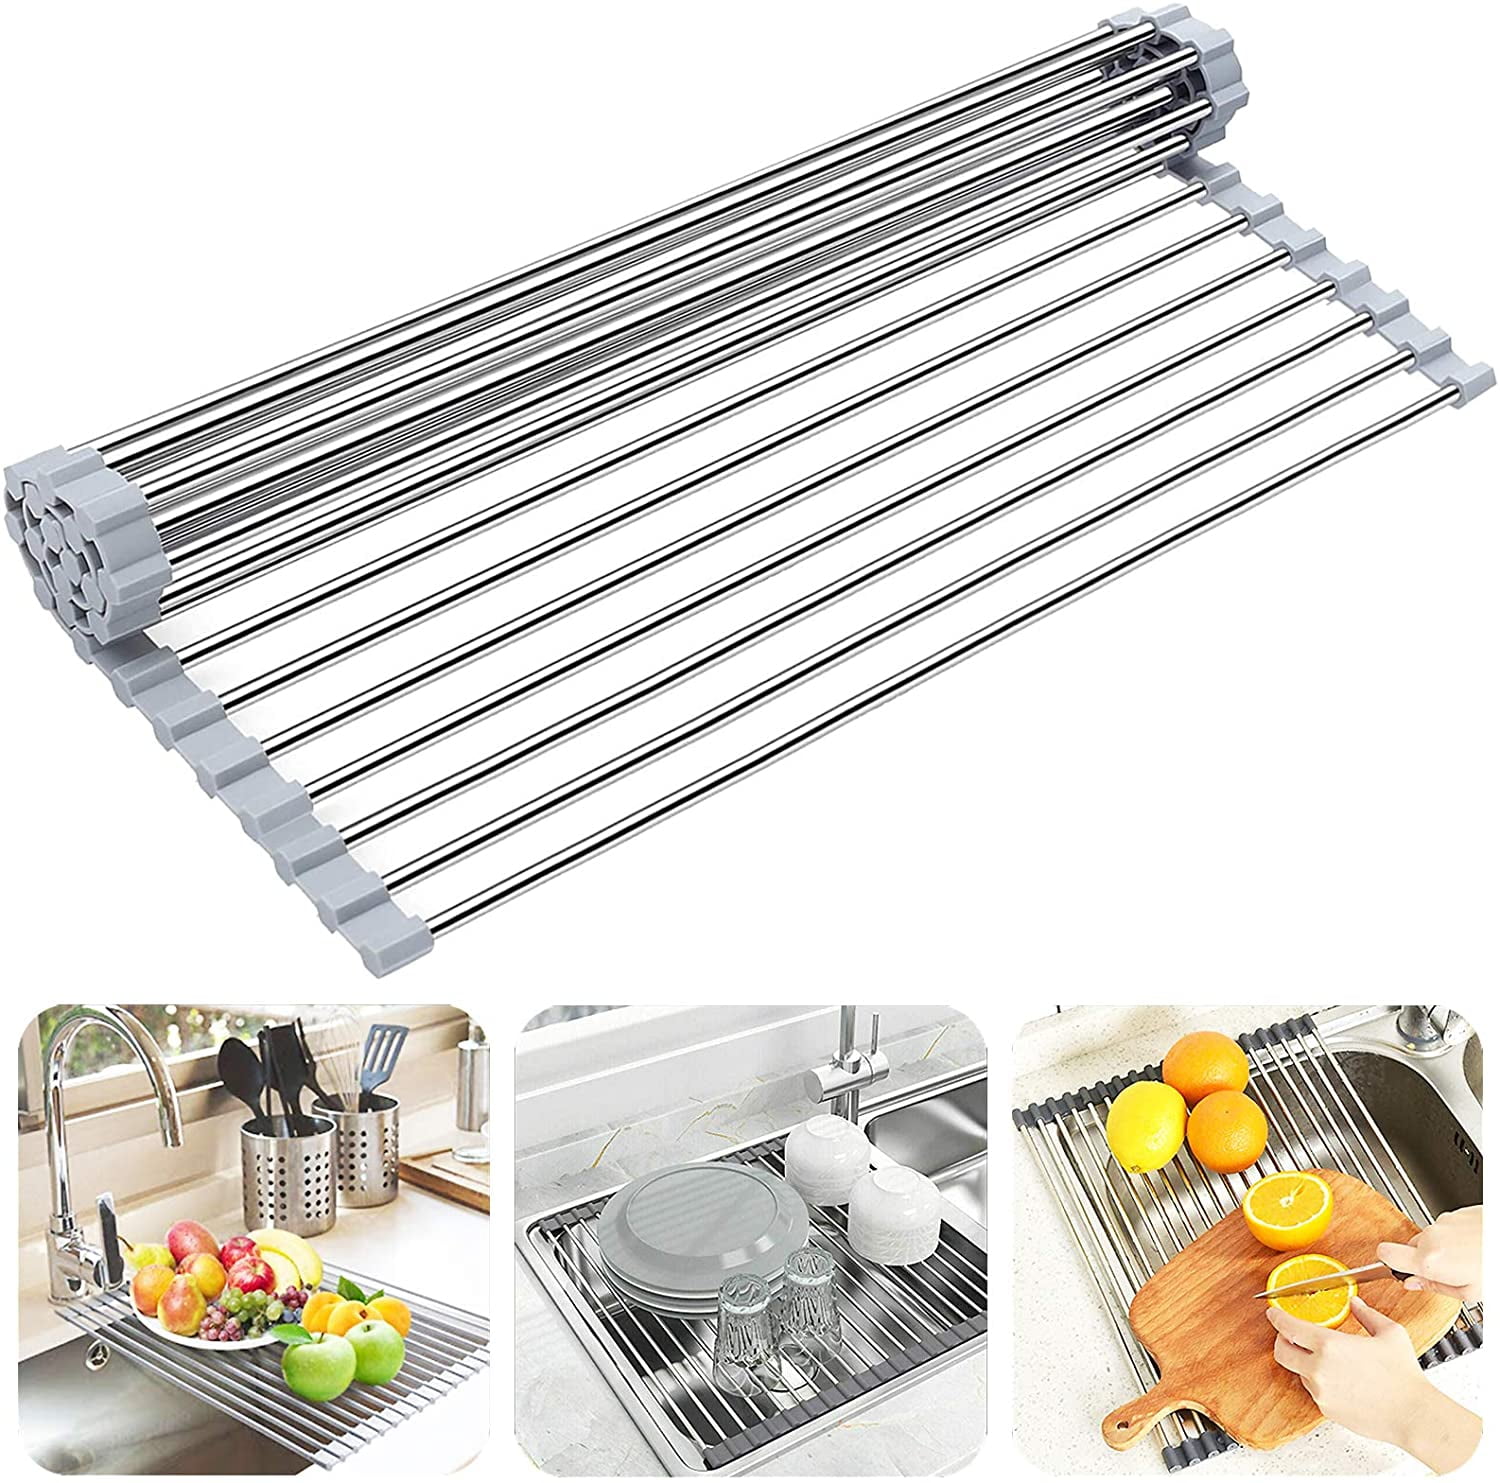 XXL Kitchen Stainless Steel Sink Drain Rack Roll Up Dish Rack Food Drying Mat 